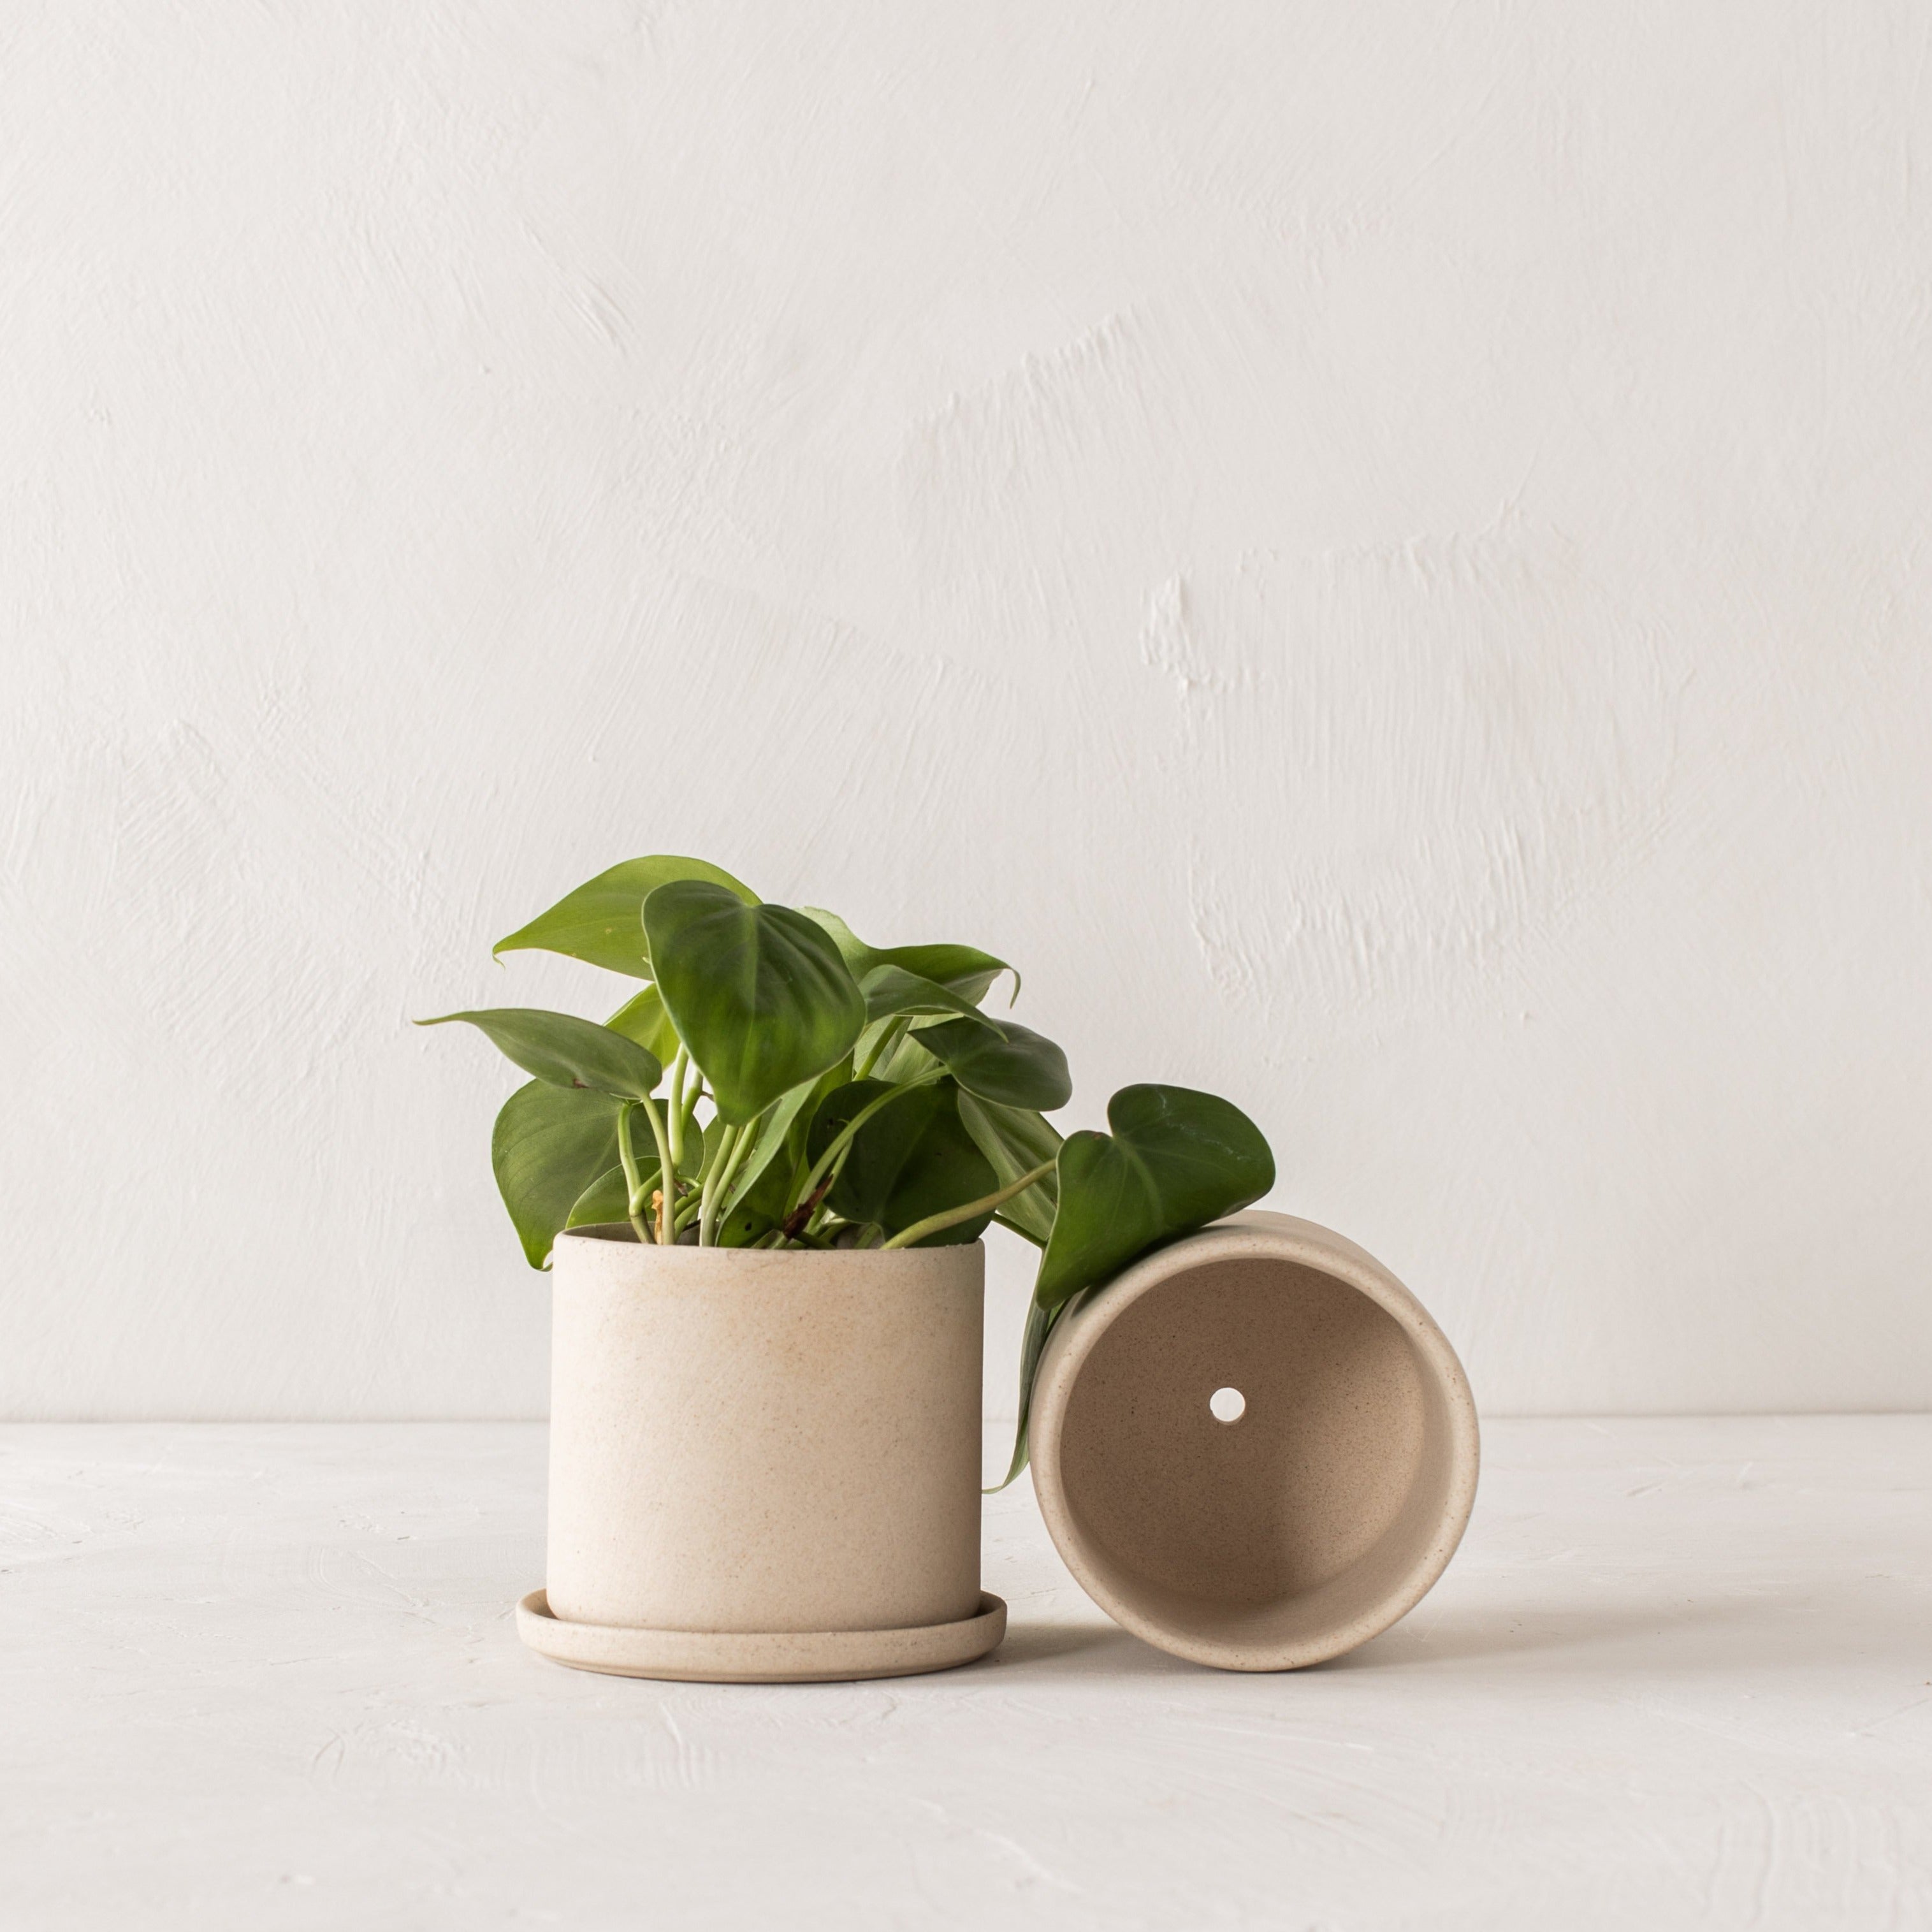 Two stoneware minimal ceramic planters with bottom drainage dish. Second planter lays on its side to show its drainage hole. Pothos plant inside. Handmade stoneware ceramic planter, designed and sold by Convivial Production, Kansas City ceramics. 